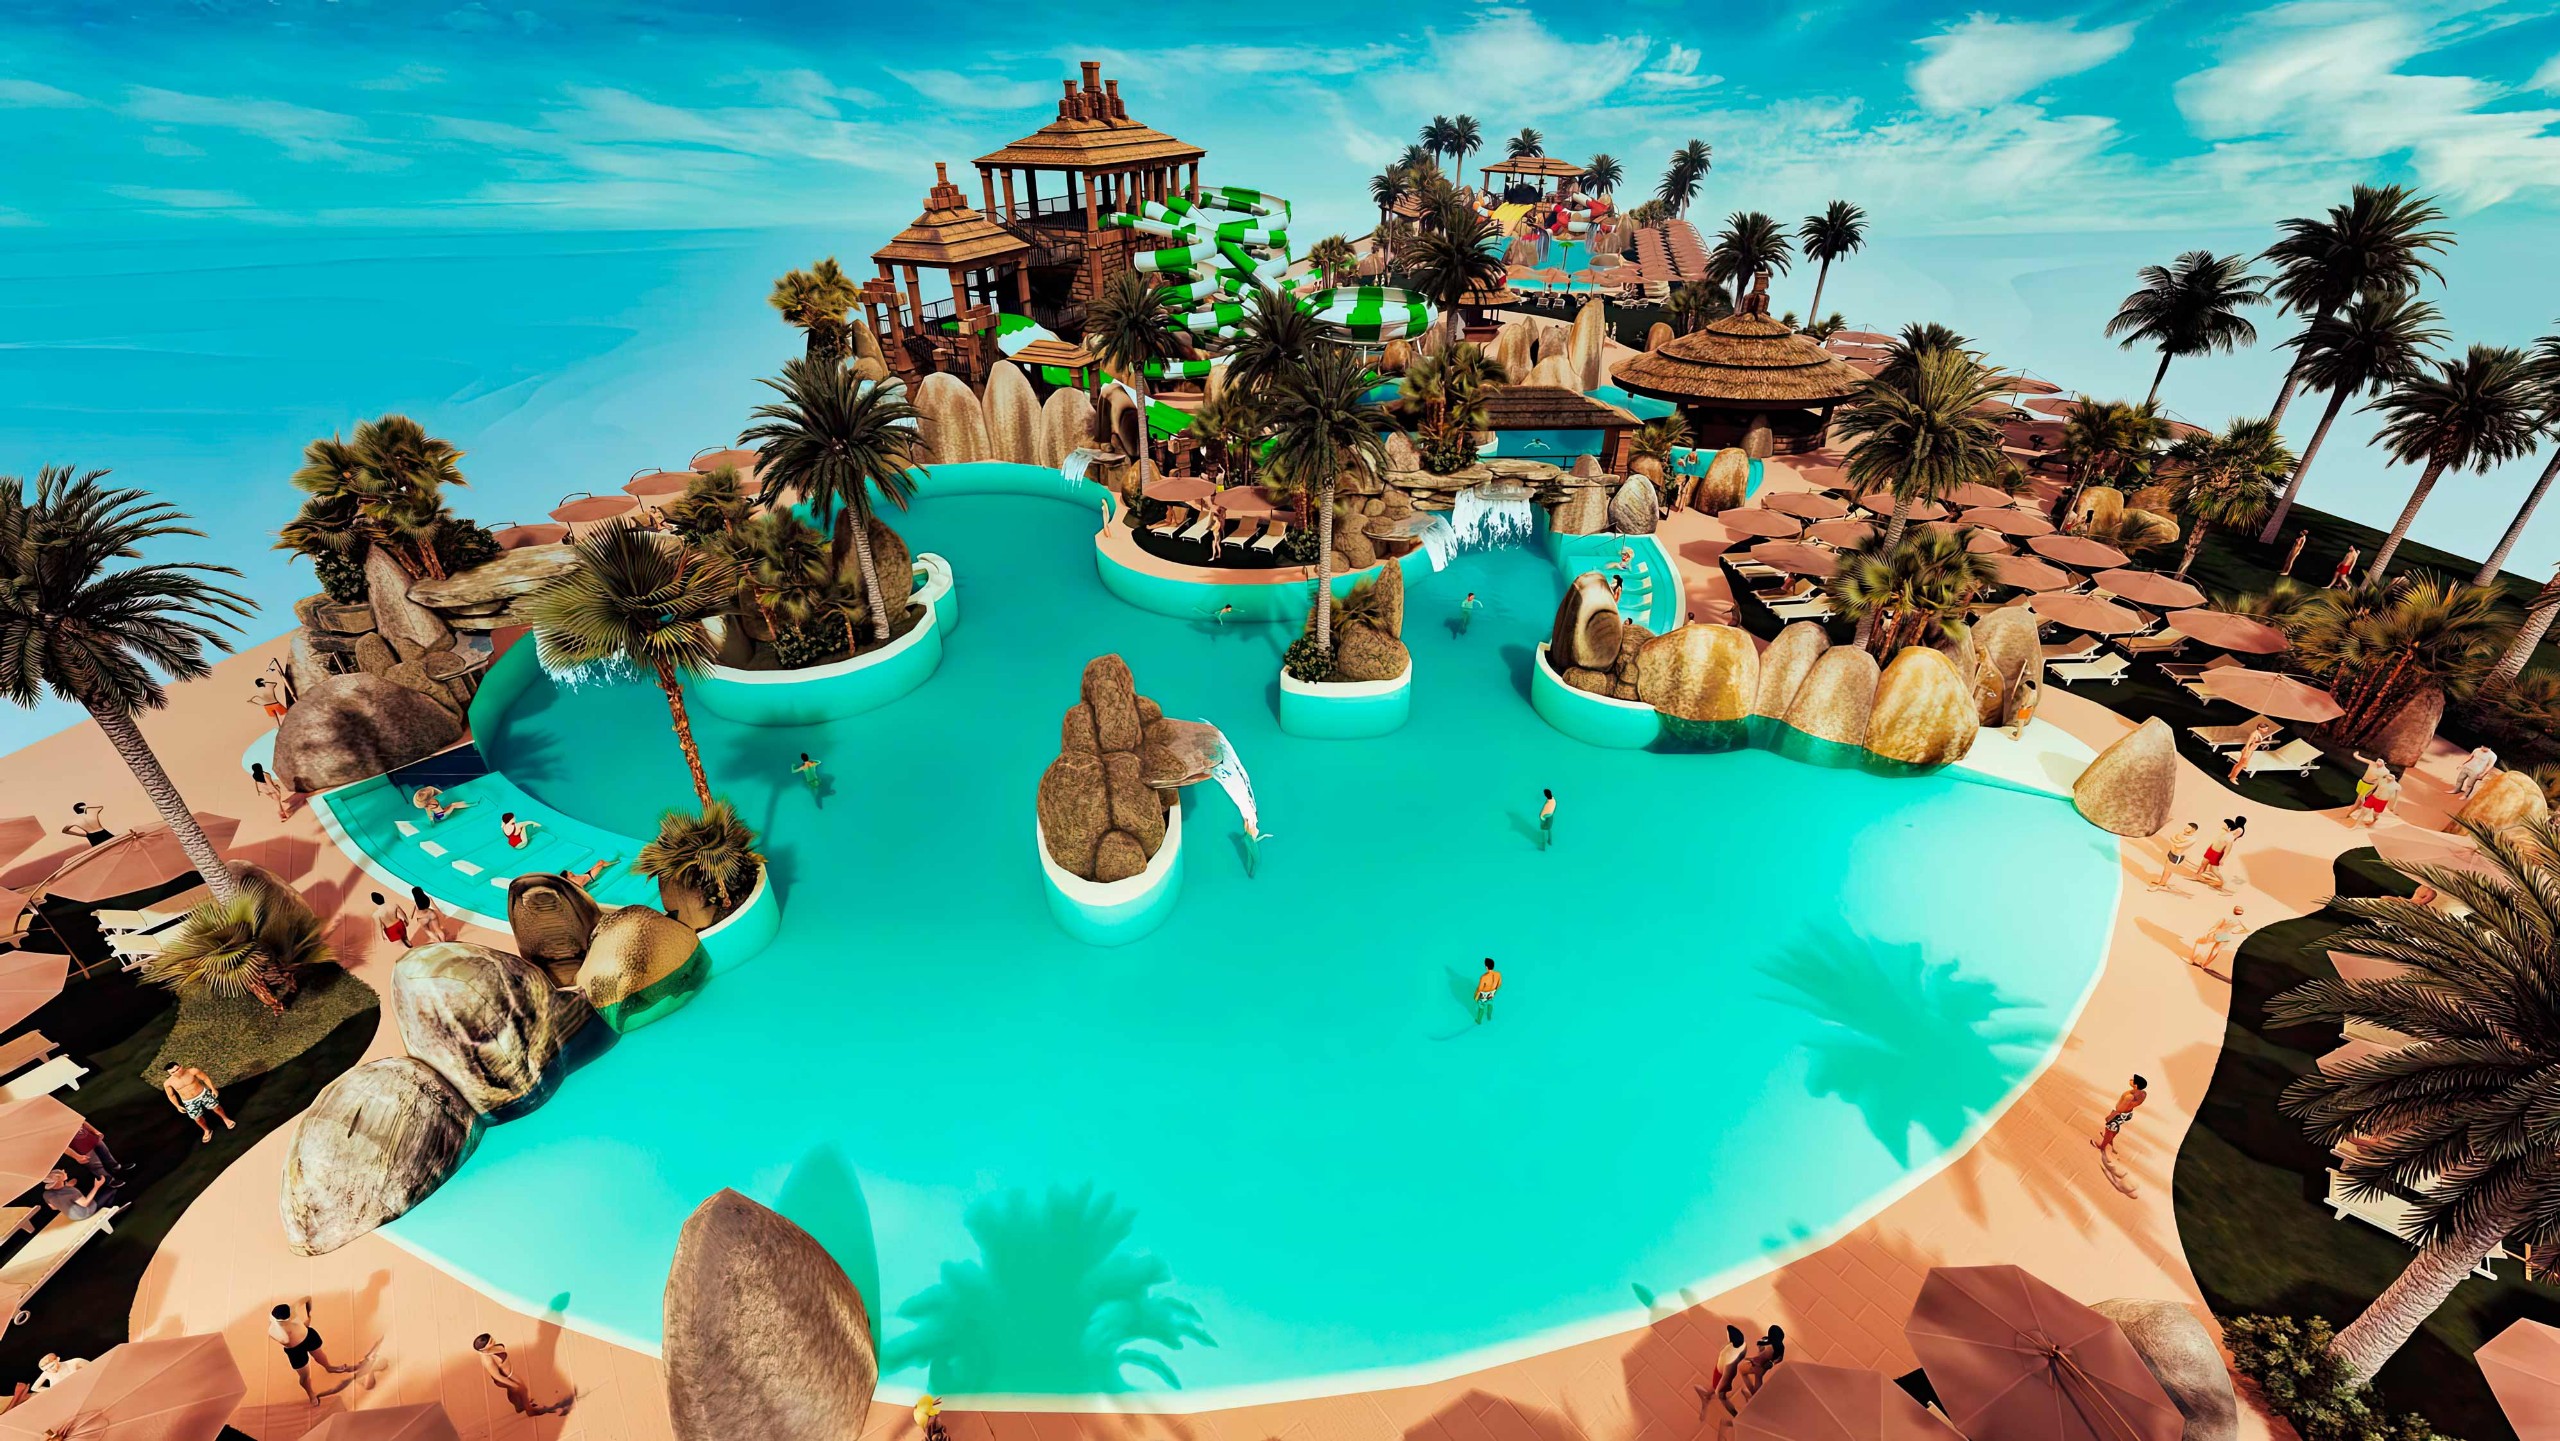 TROPICAL FAMILY WATER PARK CONCEPT DESIGN AND CONSTRUCTION